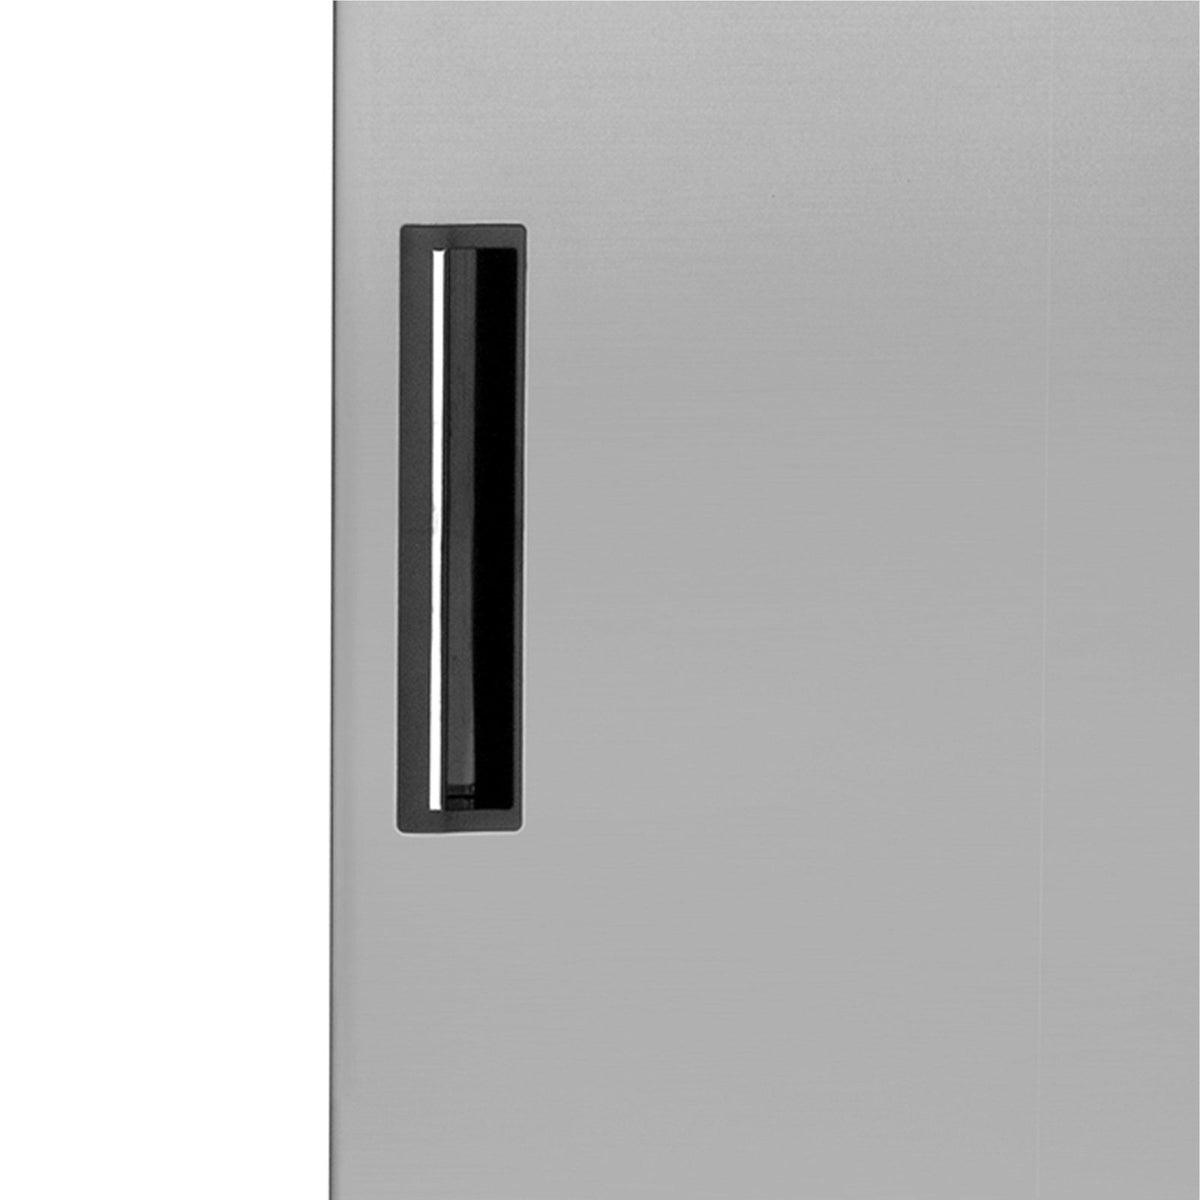 Maxx Cold MCFT - 23FDHC Single Door Reach - In Freezer, Top Mount, 27"W, 23 cu. ft. Storage Capacity, Energy Star Rated, in Stainless Steel - TheChefStore.Com